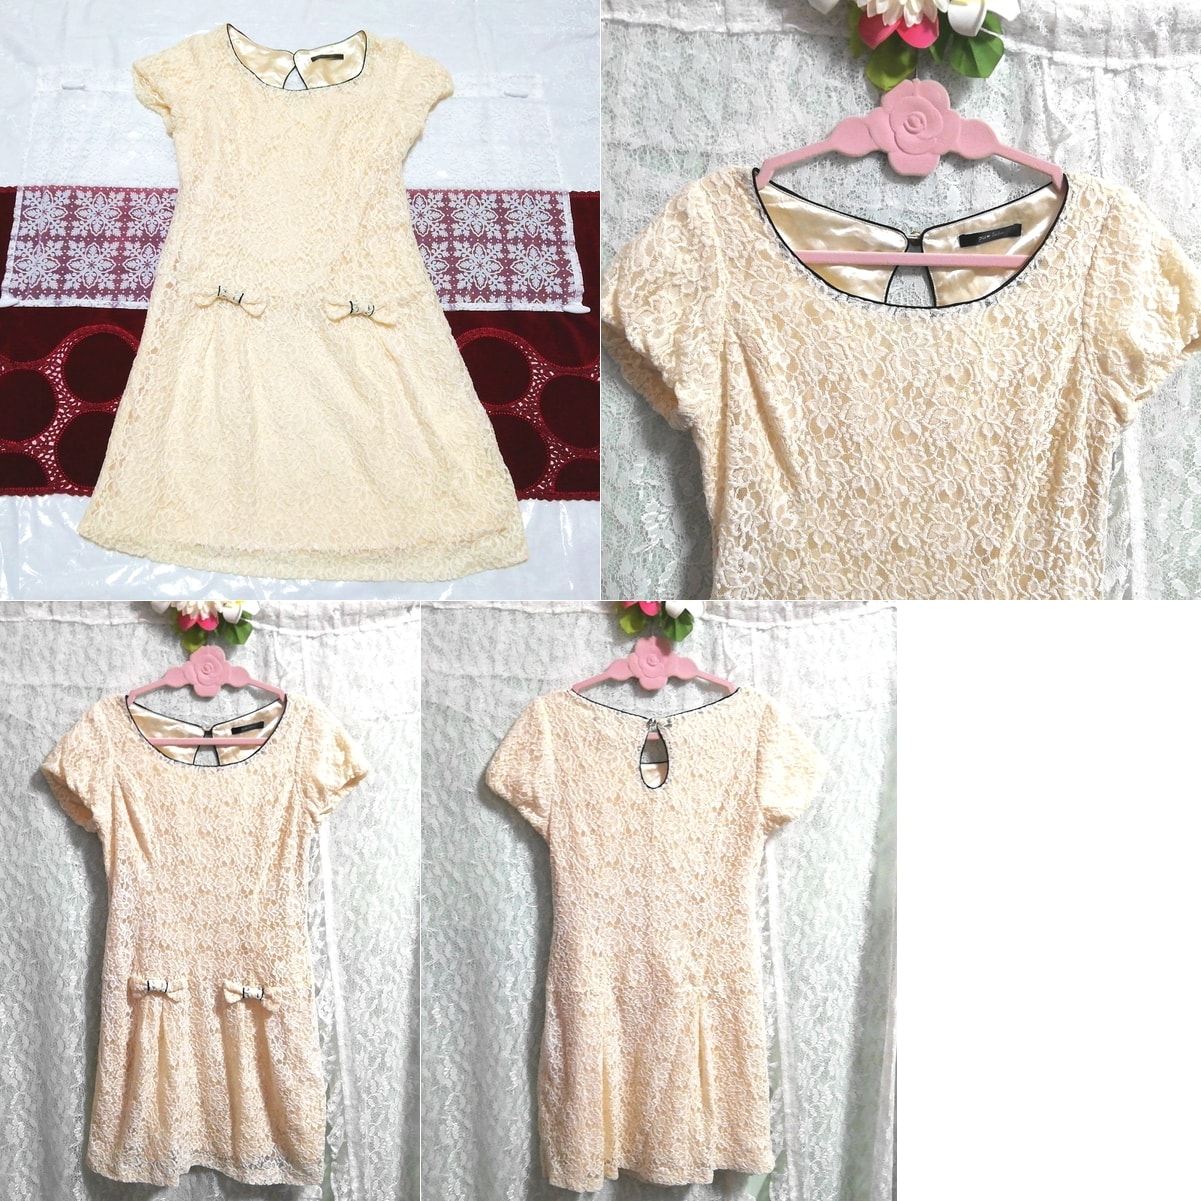 Flaxen floral white lace negligee nightgown tunic dress, tunic, short sleeve, m size